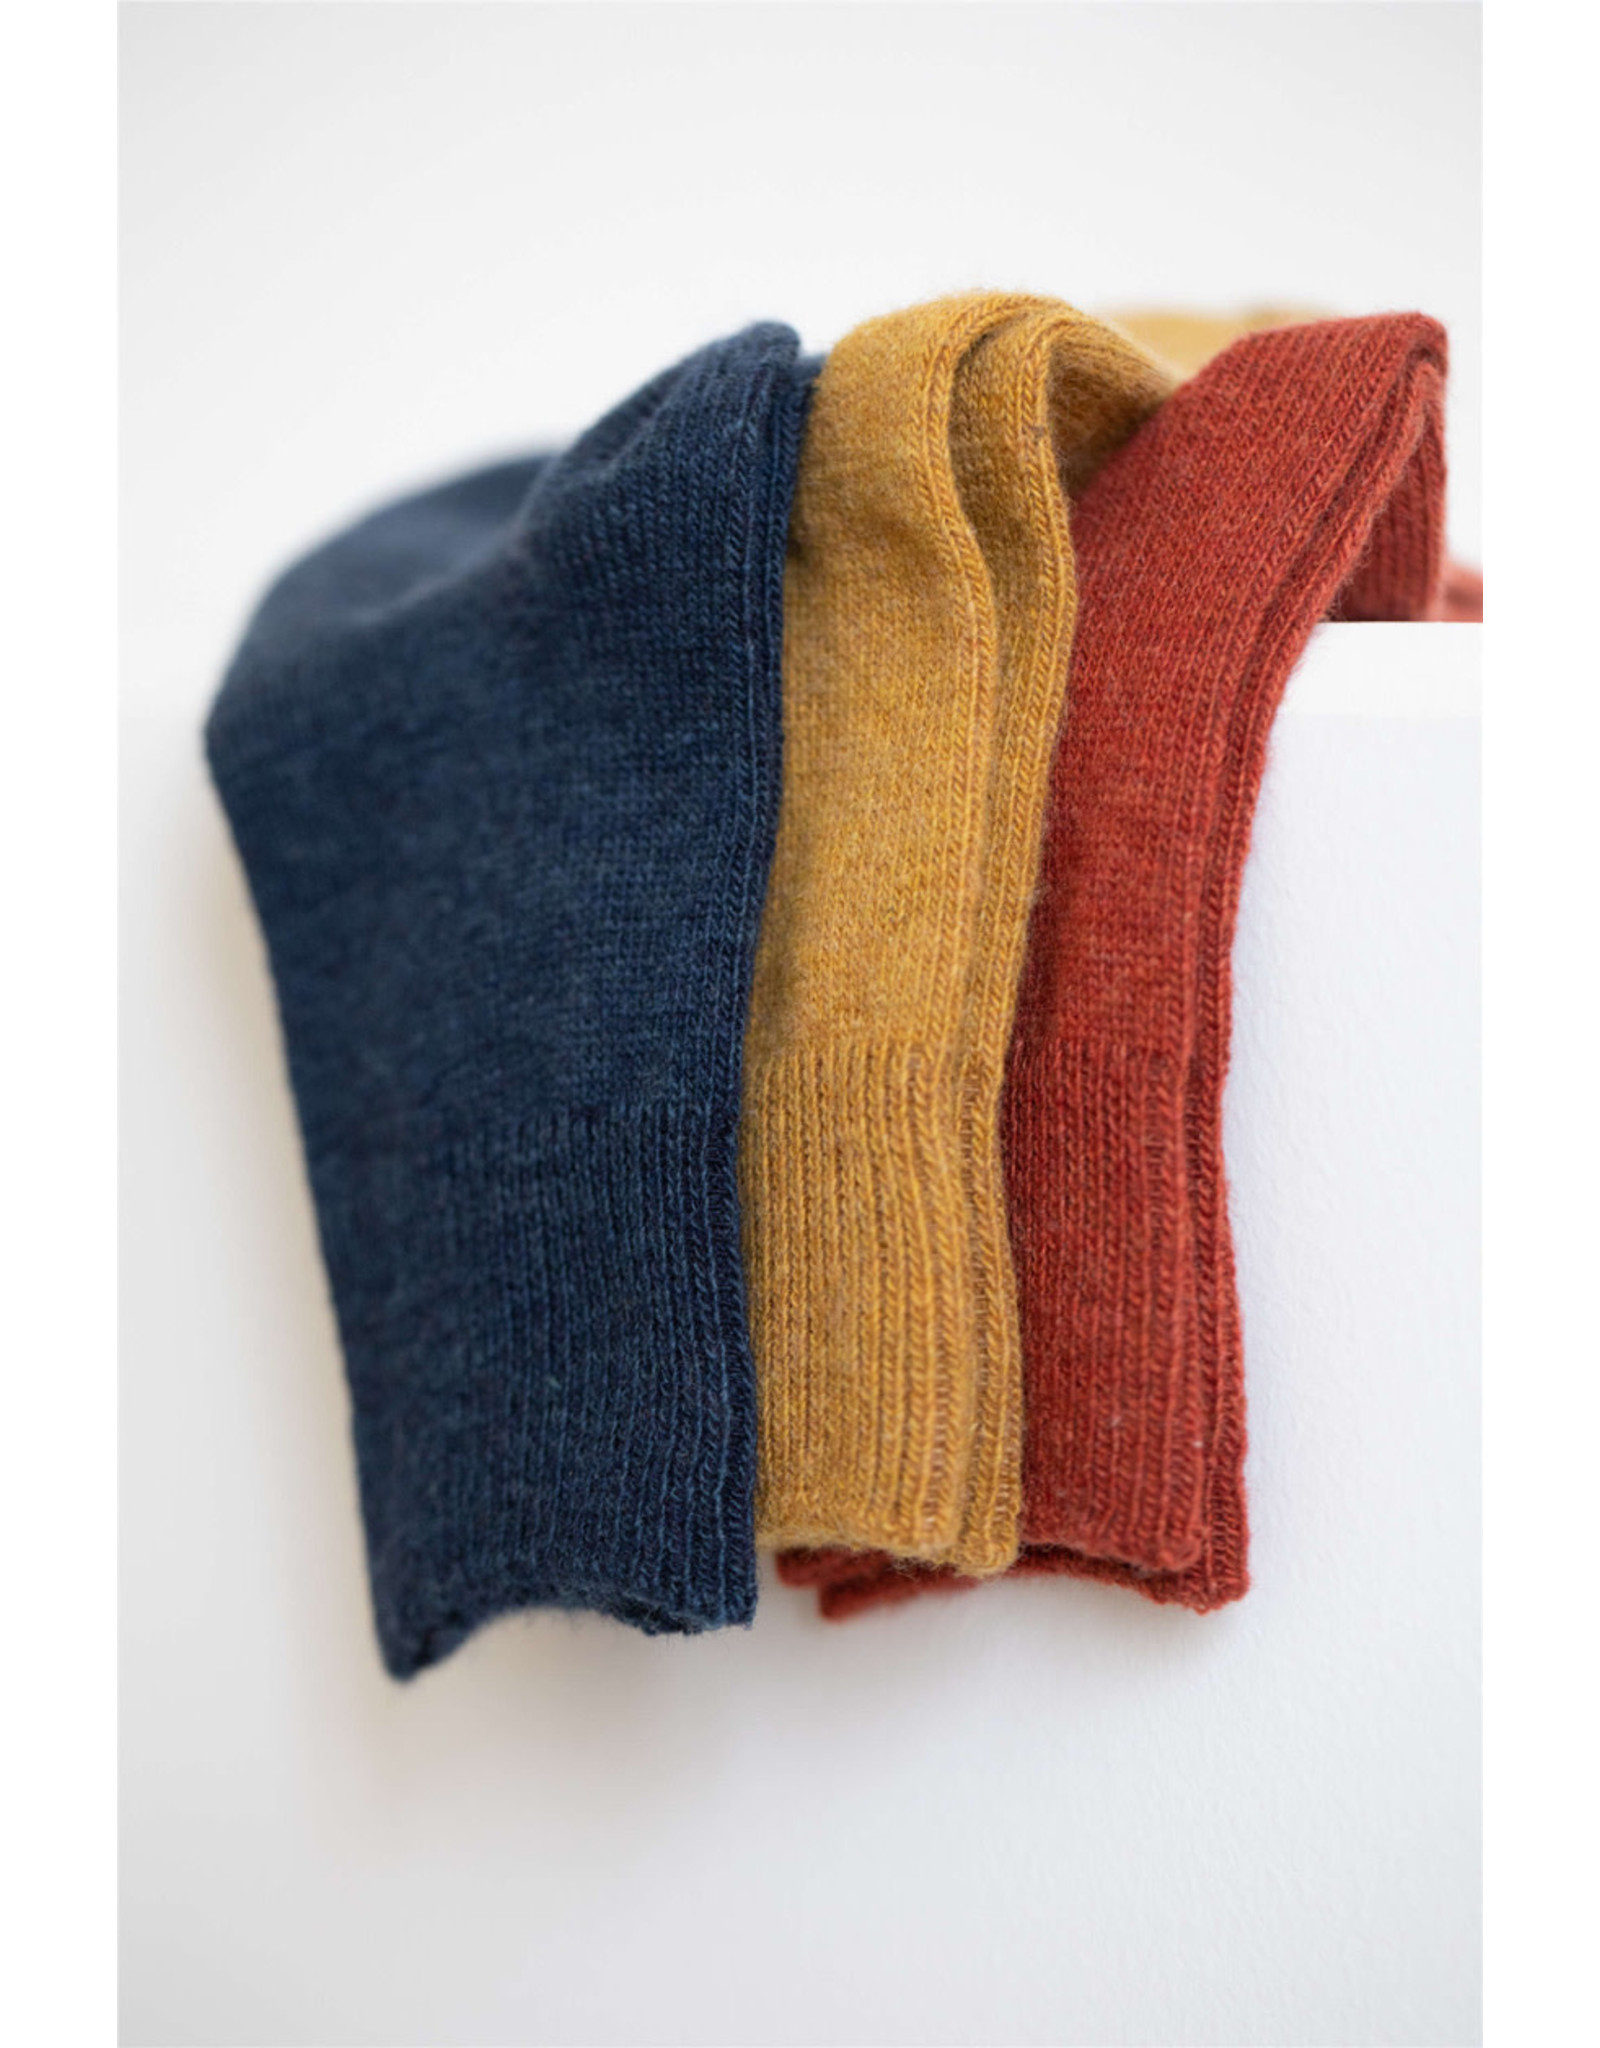 BGS XS Unified - Sweater Socks / Ginger